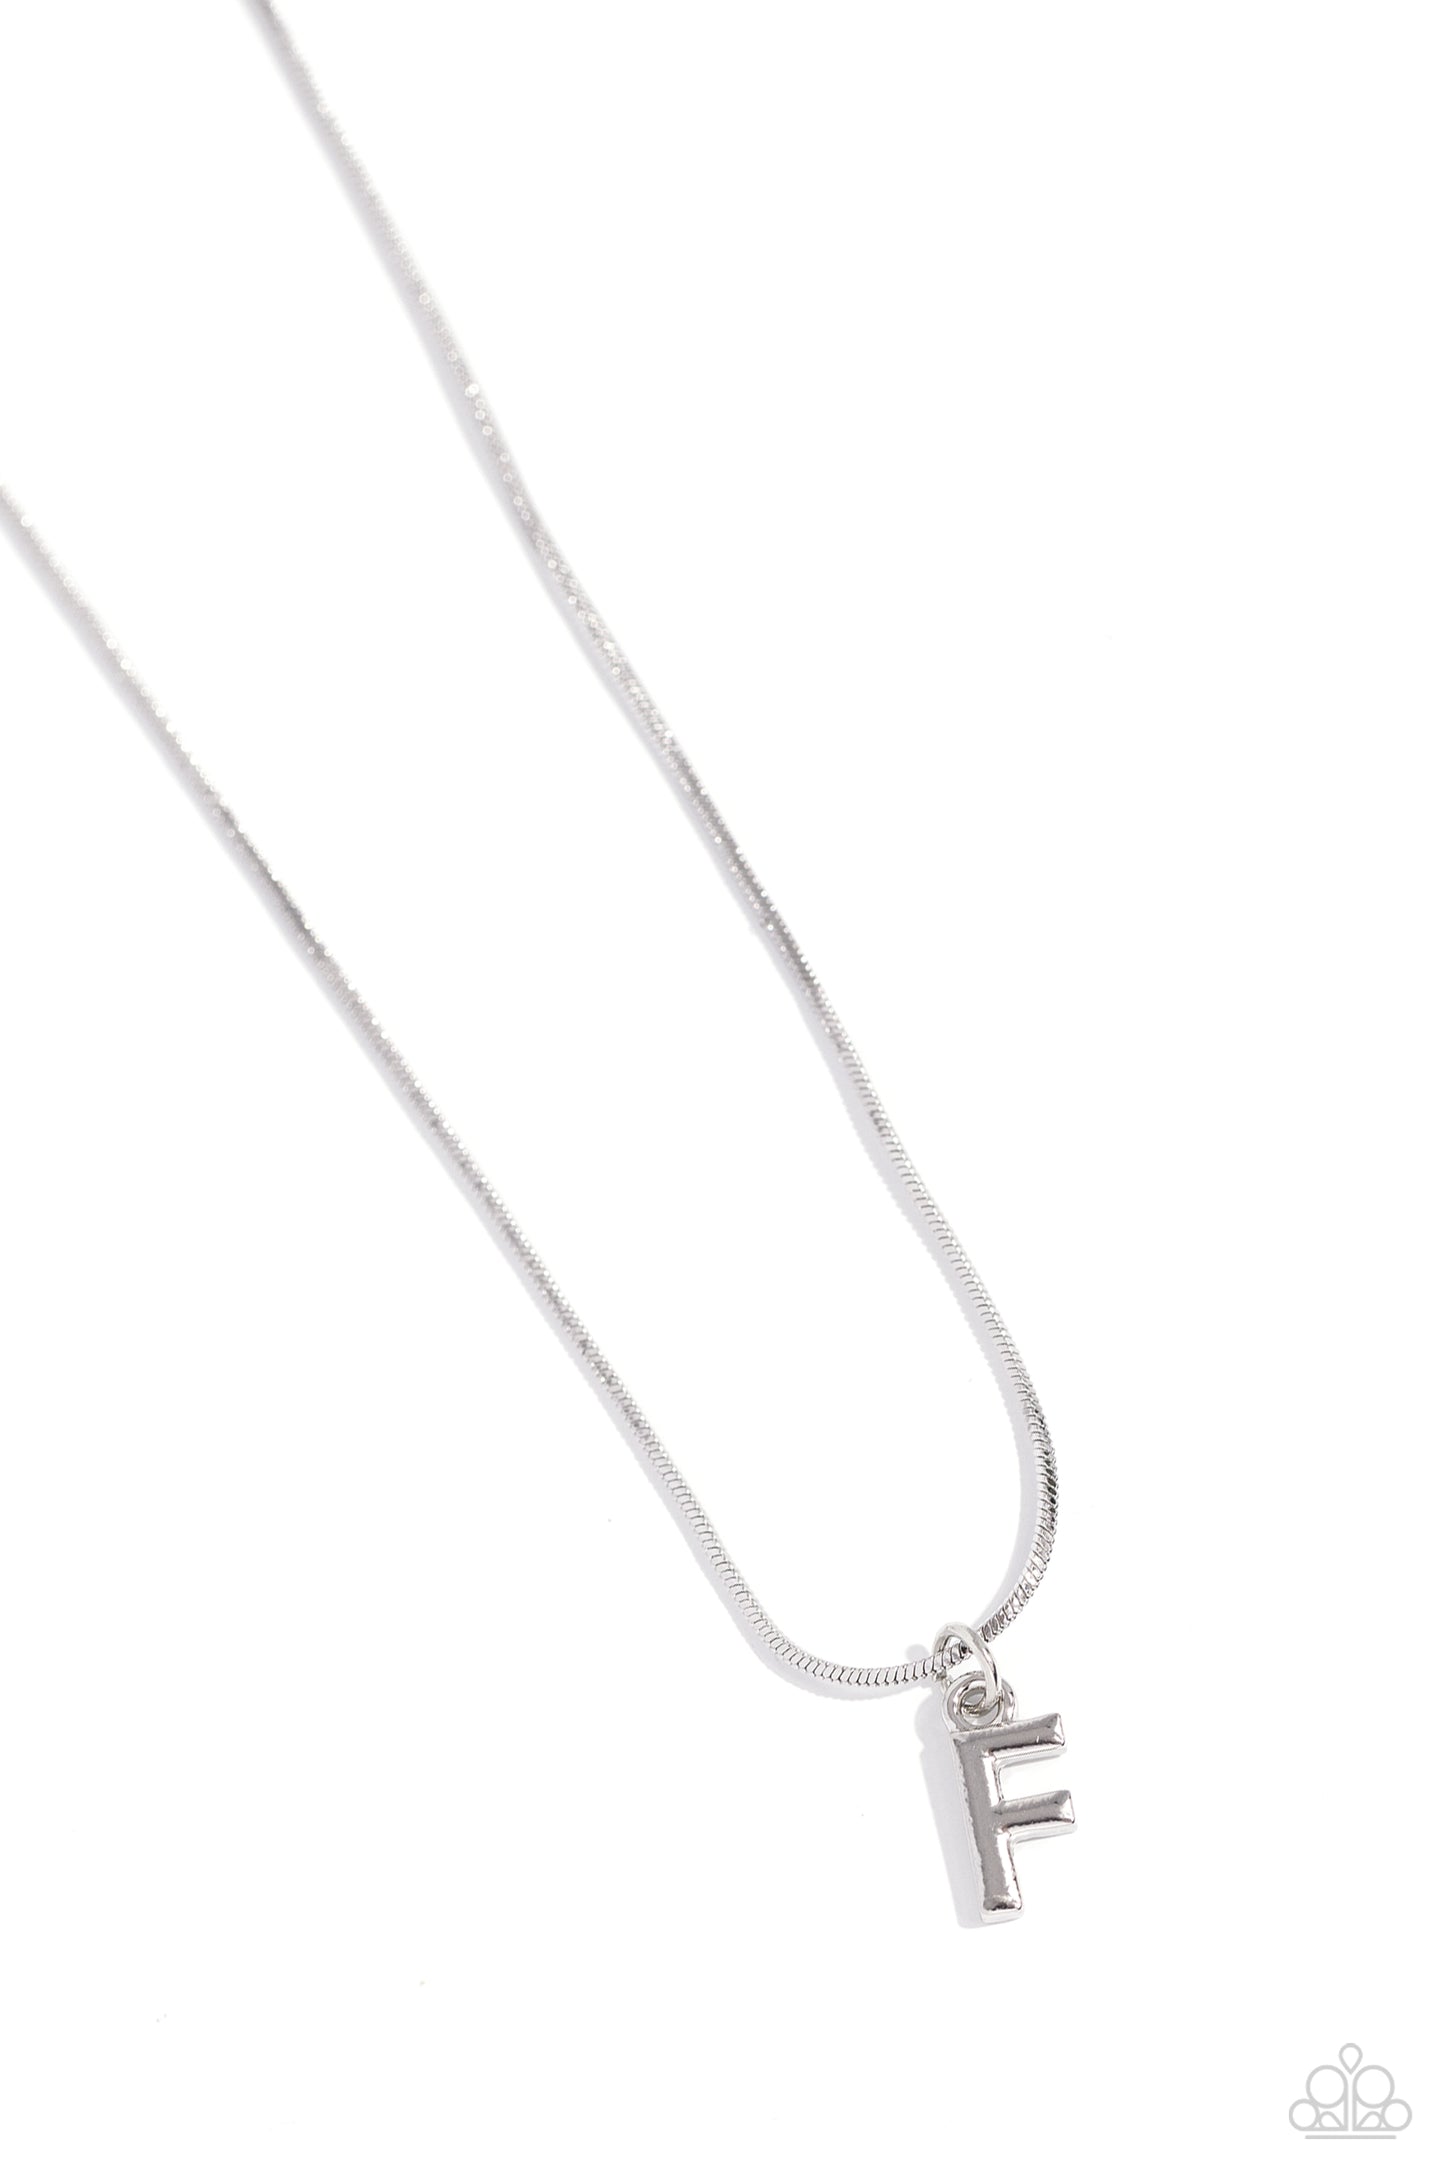 Seize the Initial - silver - F - Paparazzi necklace